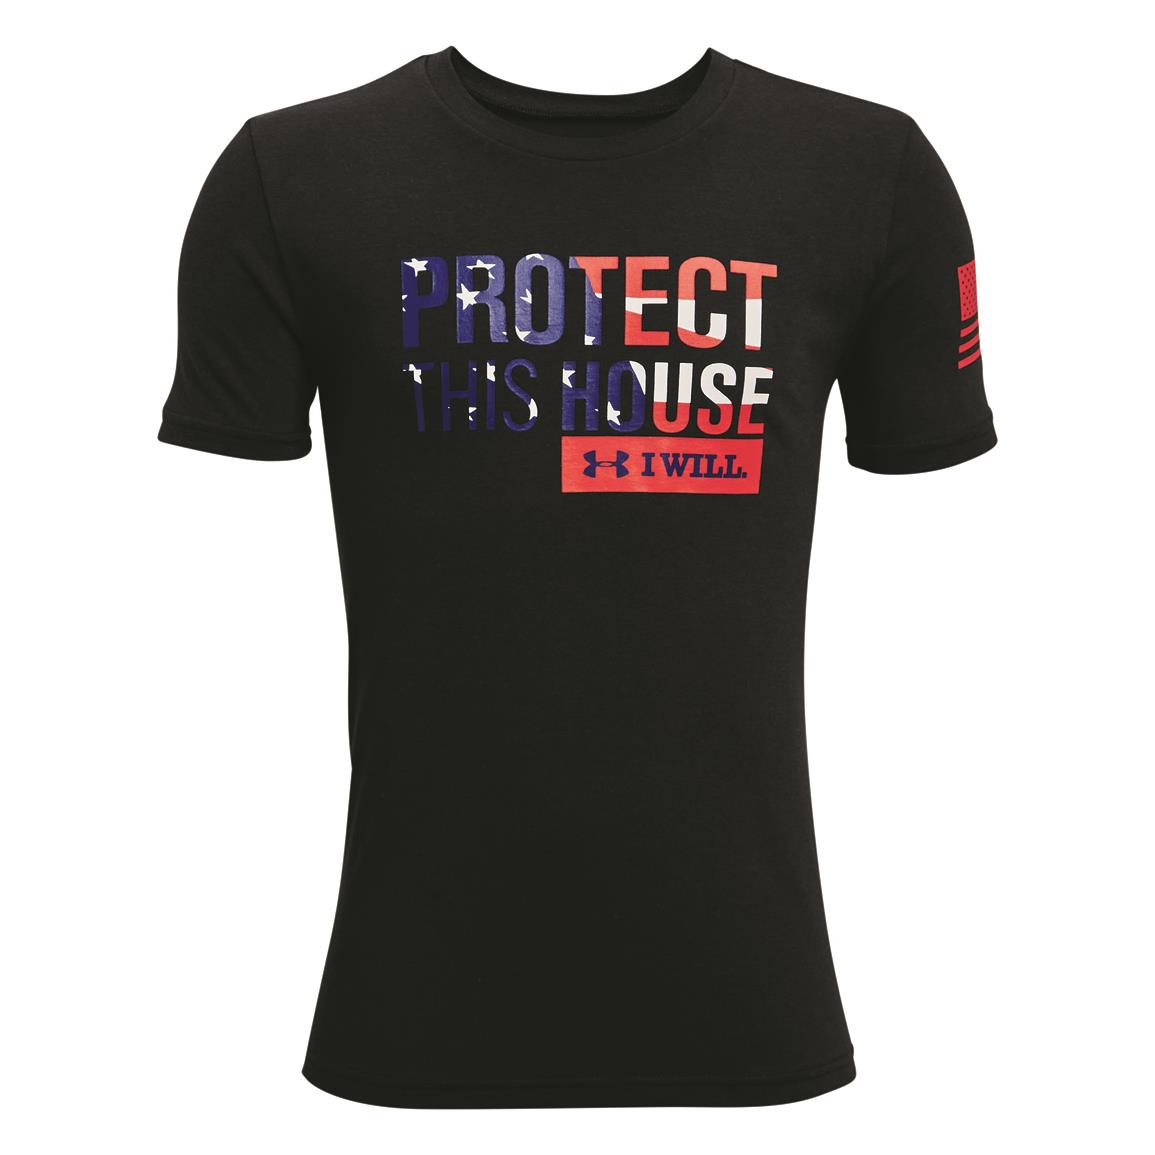 Under Armour Boys' Freedom Protect the House T-Shirt, Black/Red